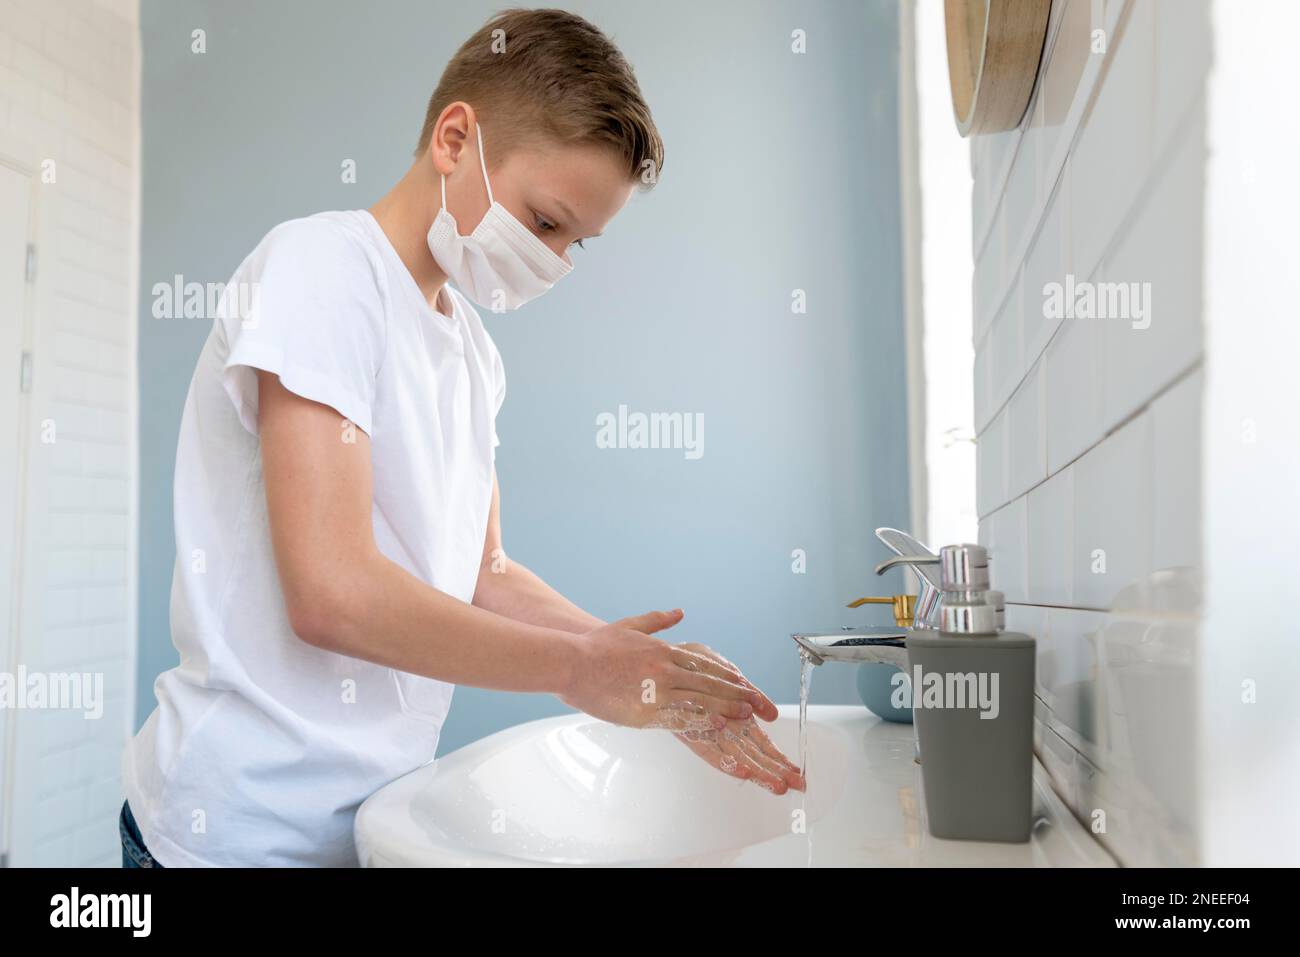 boy wearing medical mask washing his hands side view. High resolution photo Stock Photo